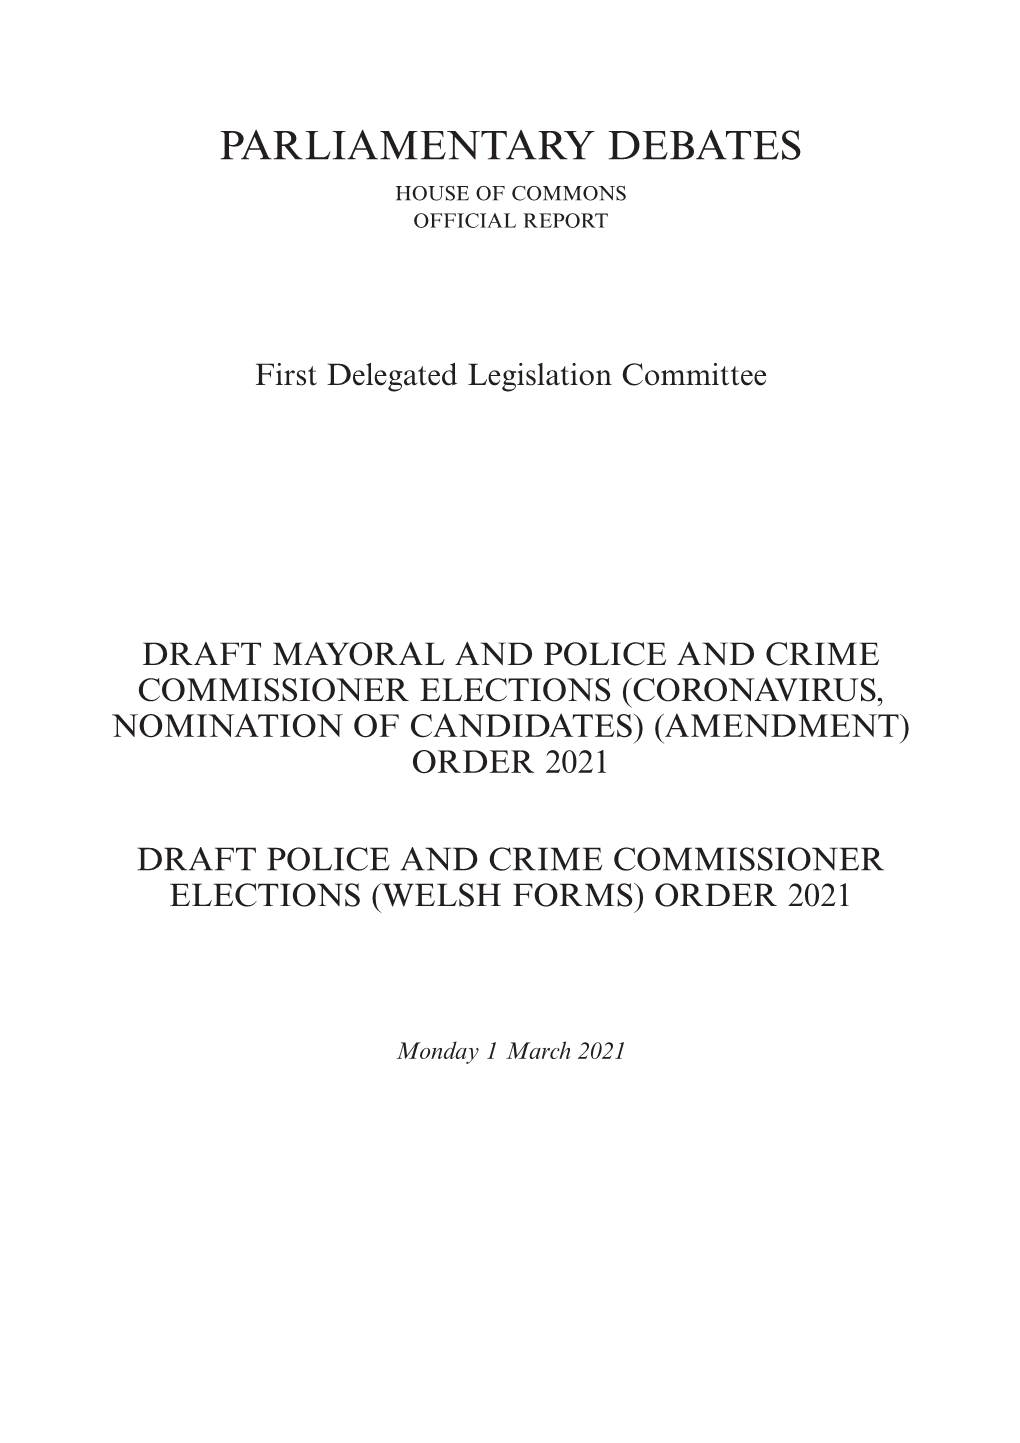 Draft Mayoral and Police and Crime Commissioner Elections (Coronavirus, Nomination of Candidates) (Amendment) Order 2021